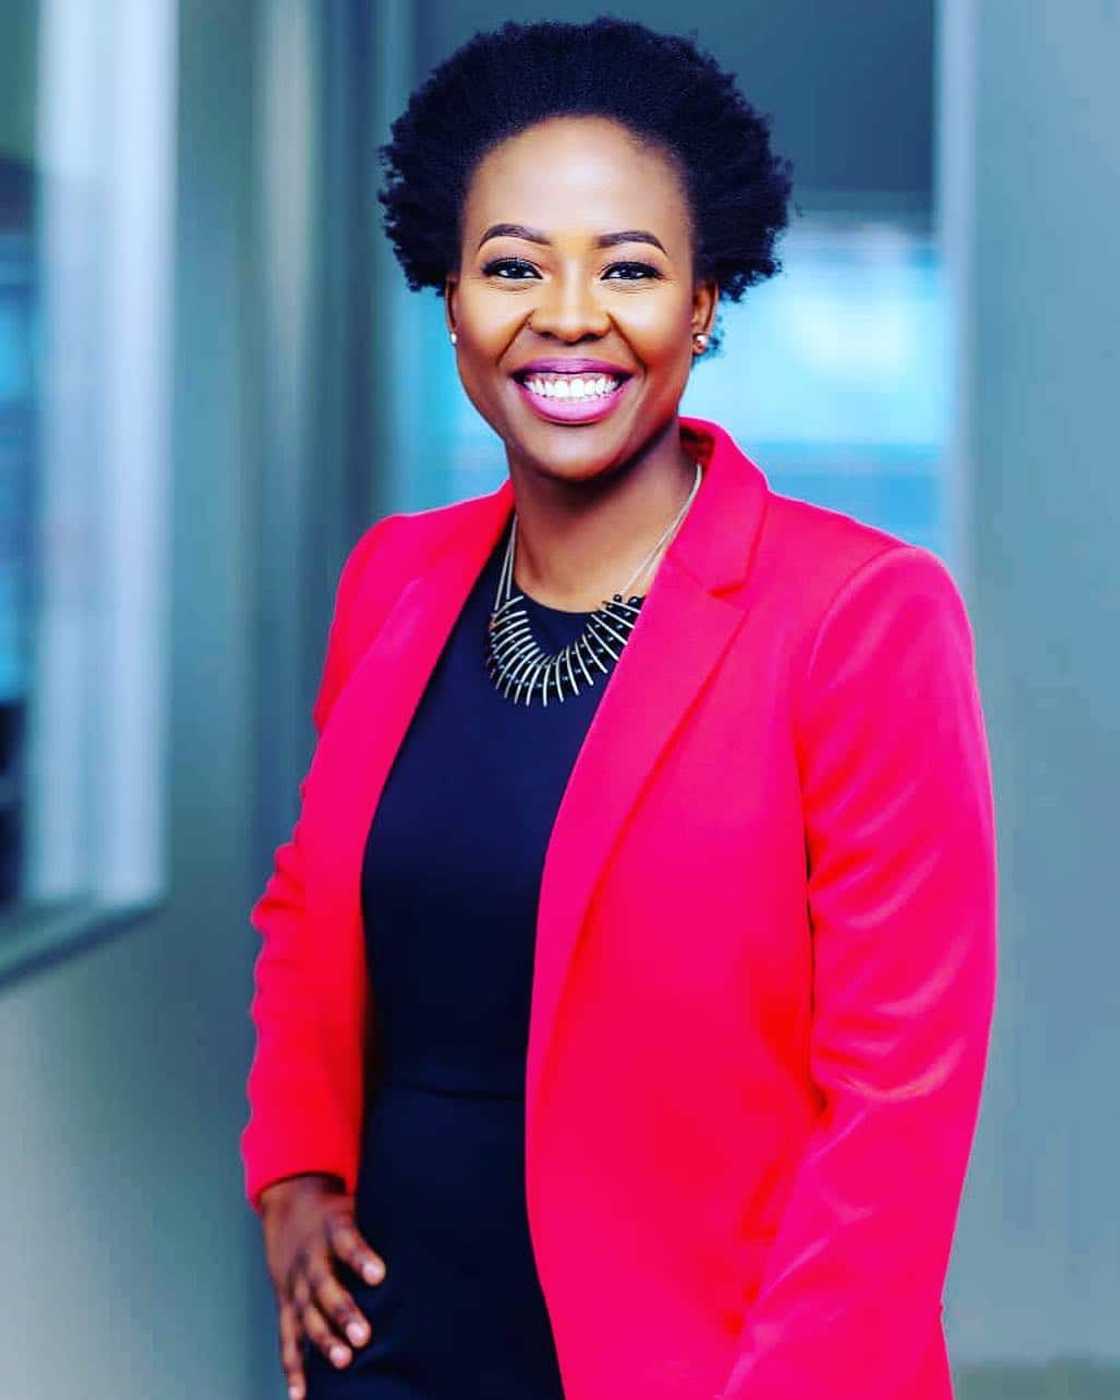 5 best motivational speakers in South Africa 2019